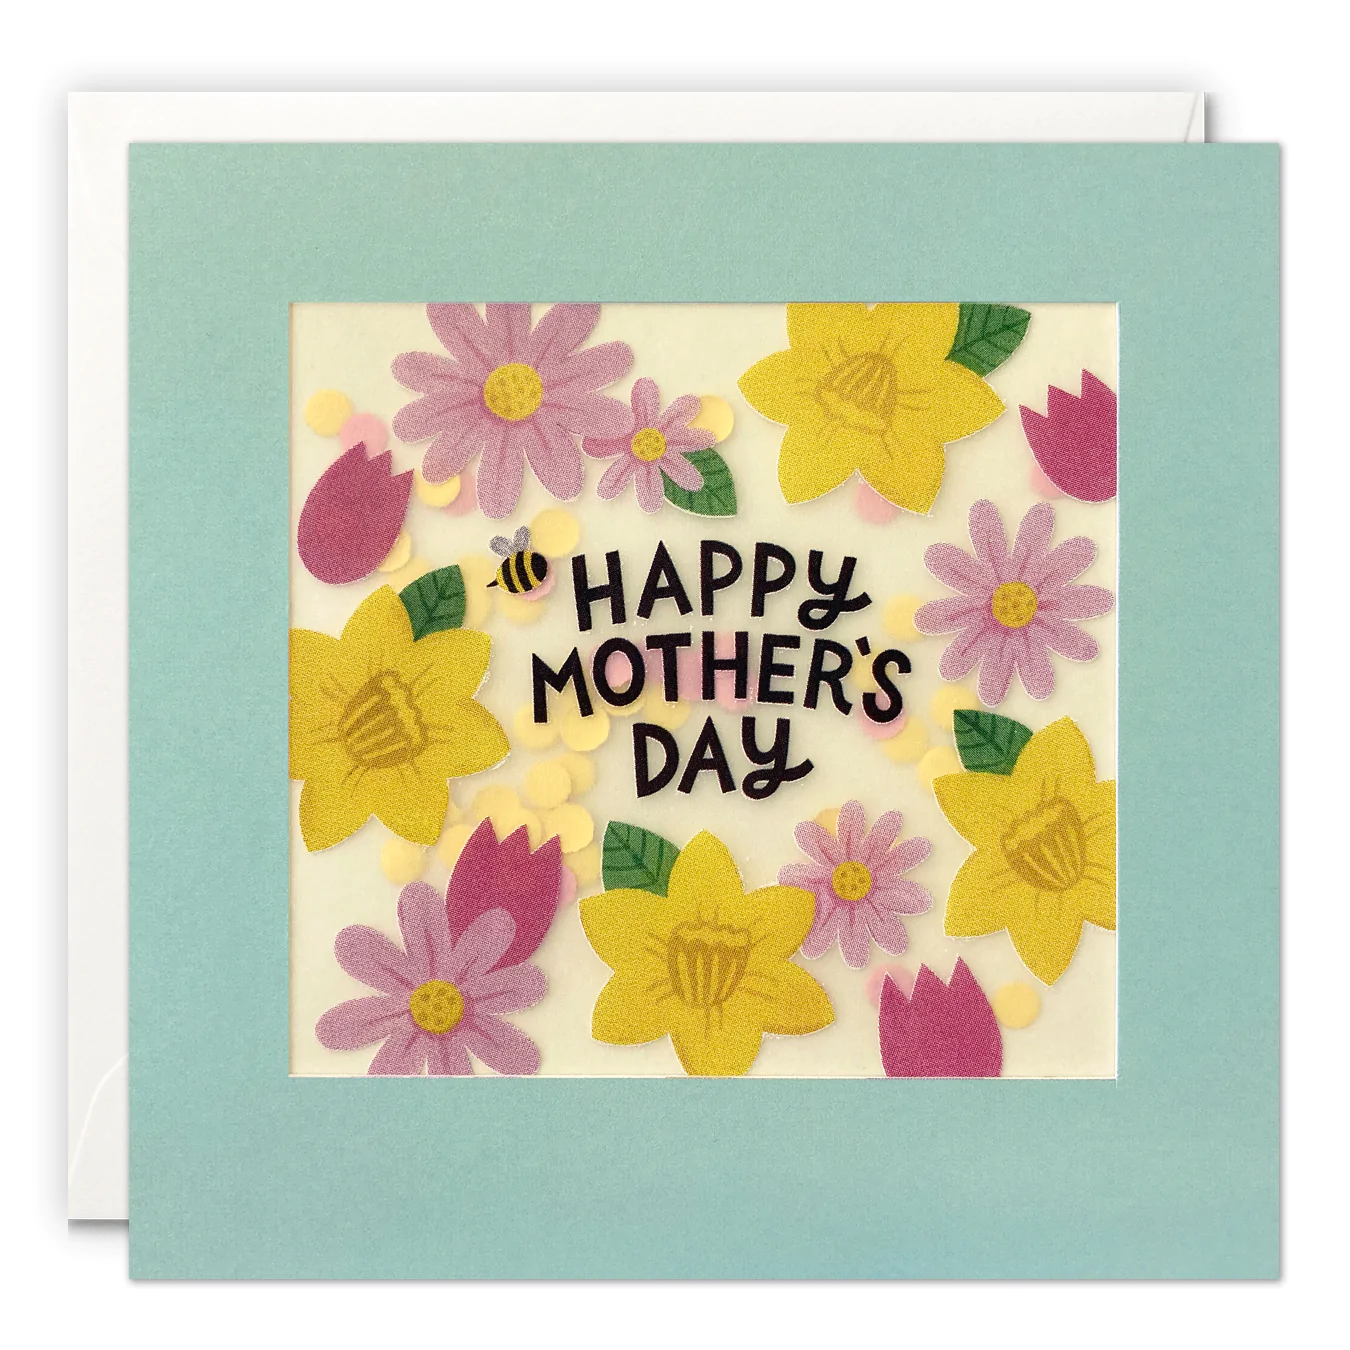 happy mothers day shakies card flowers and bee by James ellis